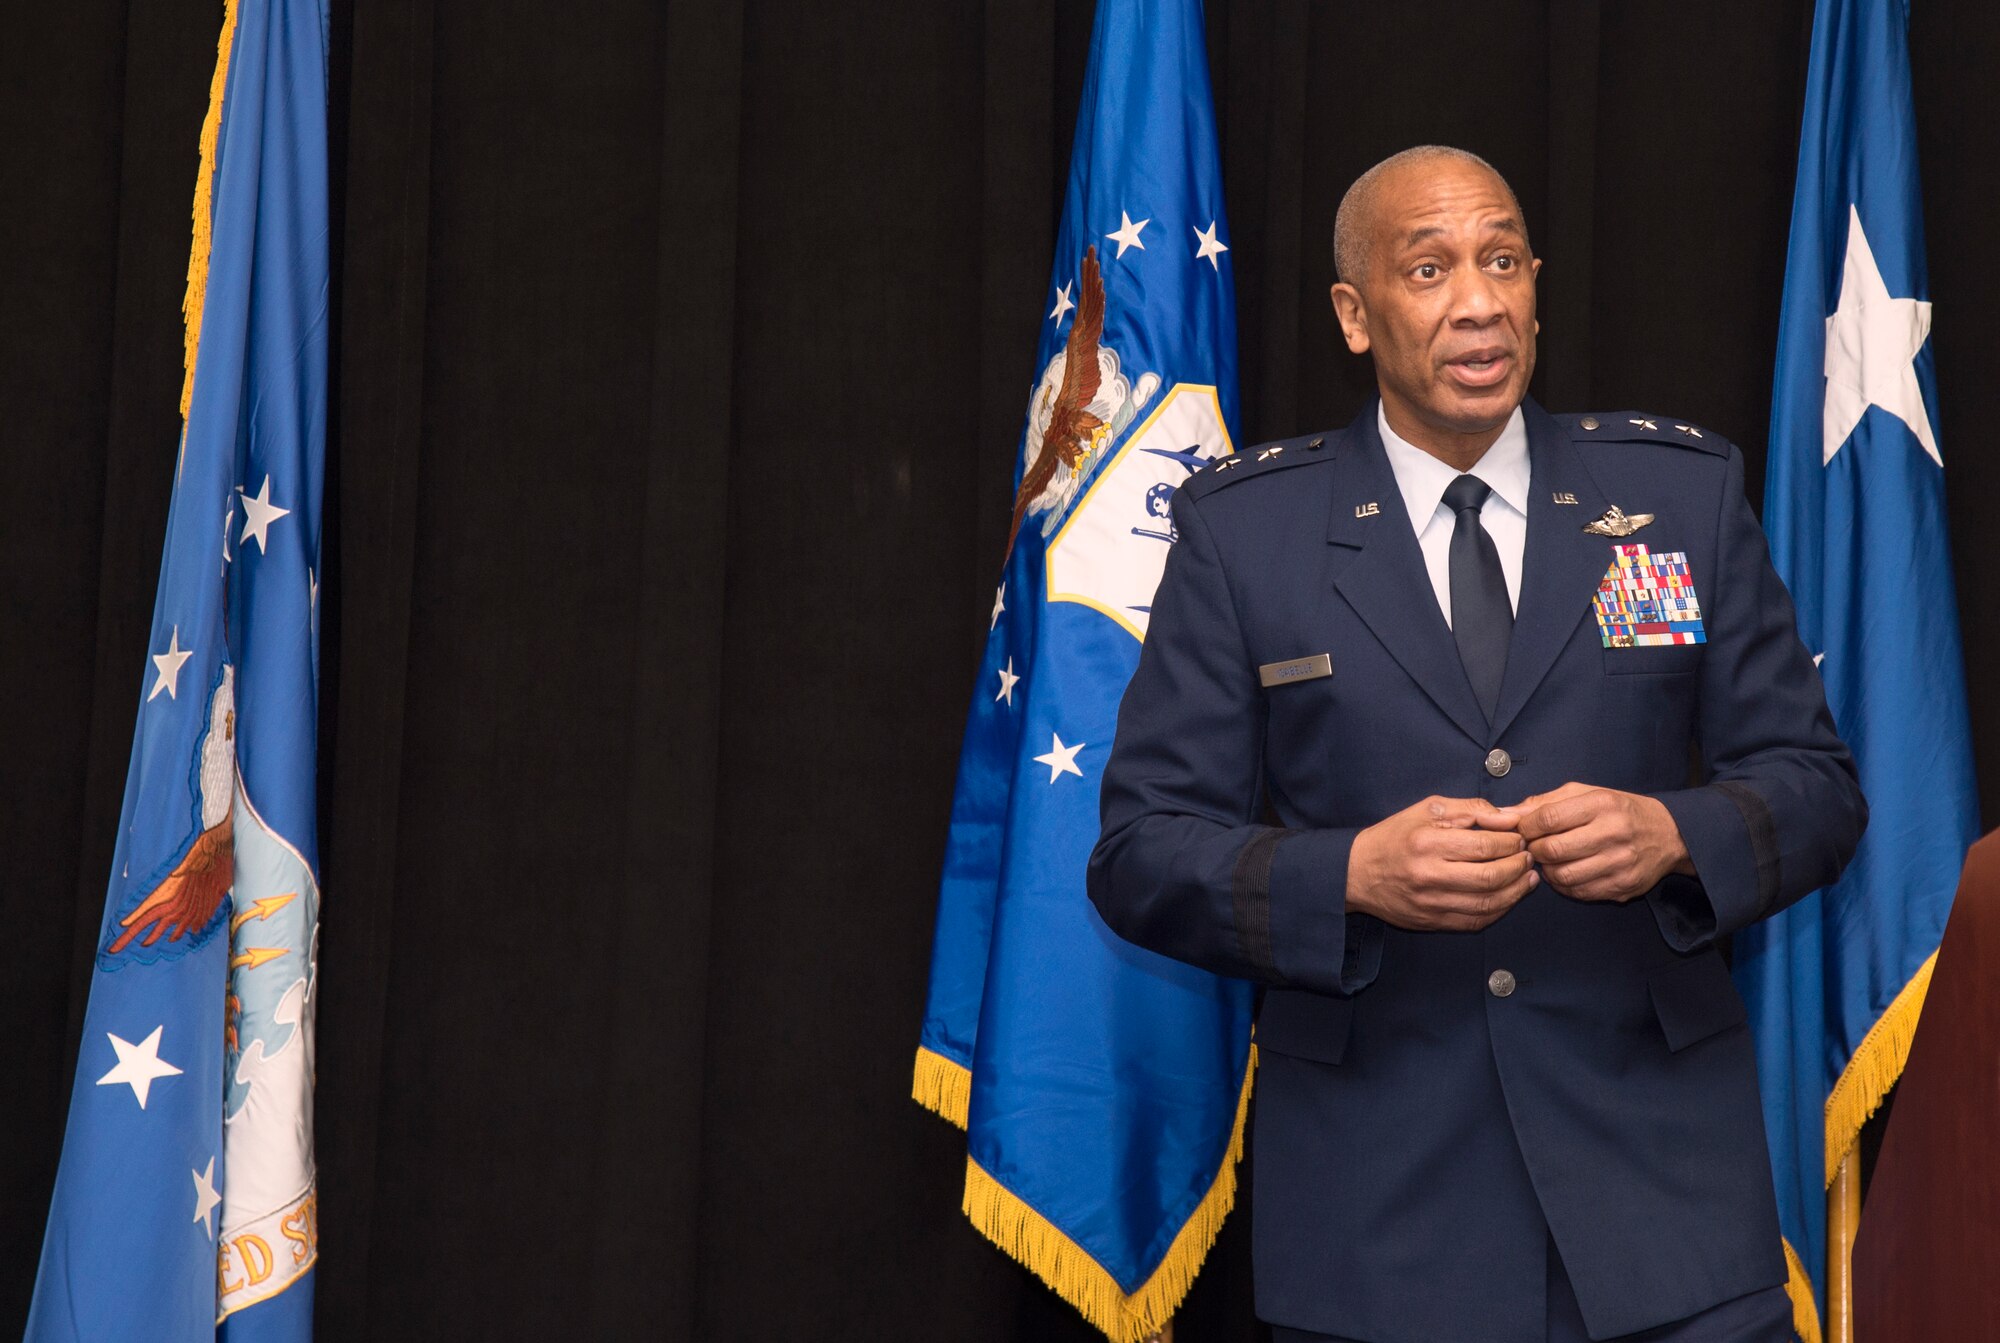 Maj. Gen. Leonard Isabelle, Jr., commander of the Michigan Air National Guard, addresses the audience while presiding over Brig. Gen. Rolf E. Mammen’s promotion ceremony here on May 4, 2019.